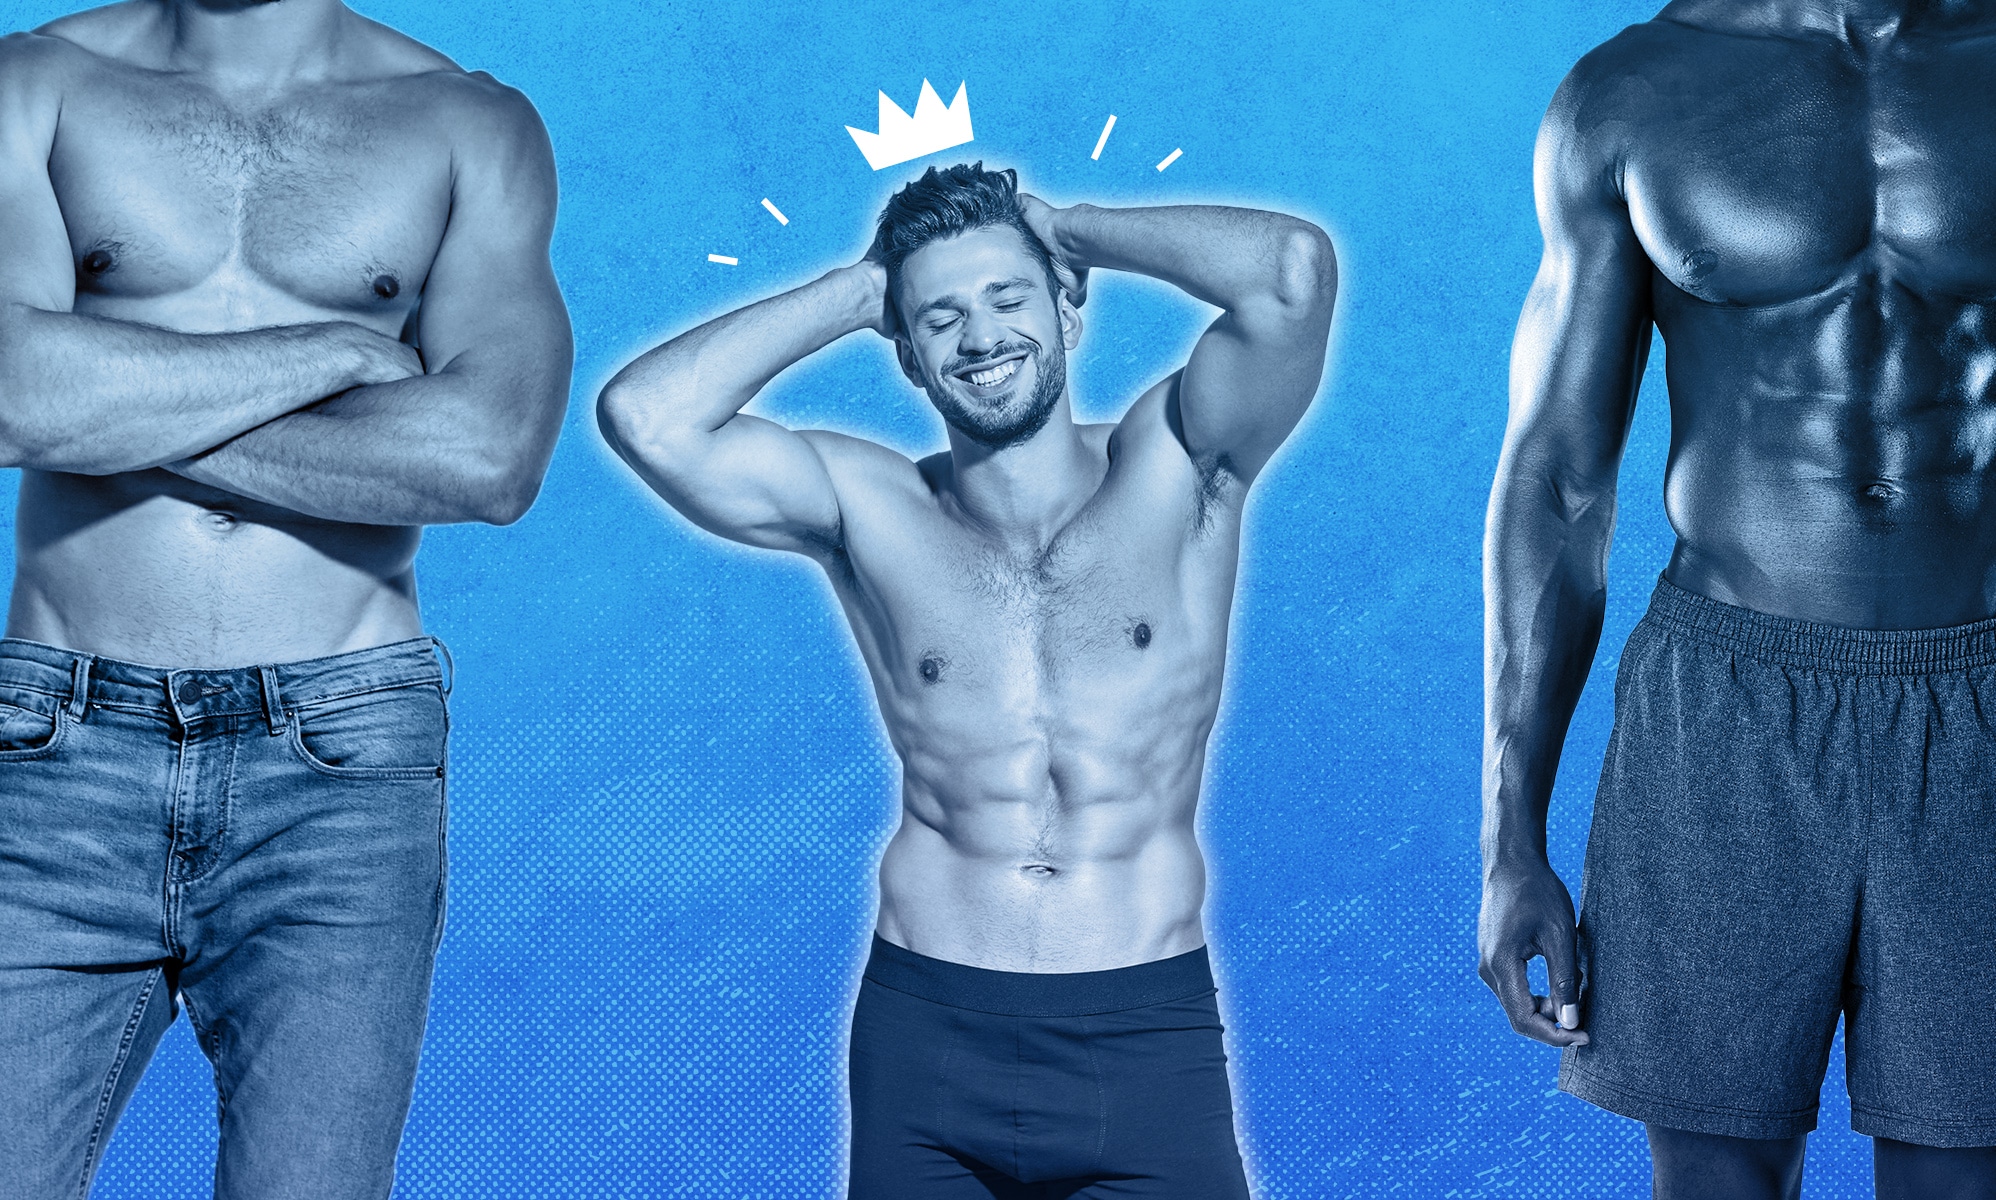 Tiny Small - Tall tops and short bottoms: How height became a toxic gay dating trope